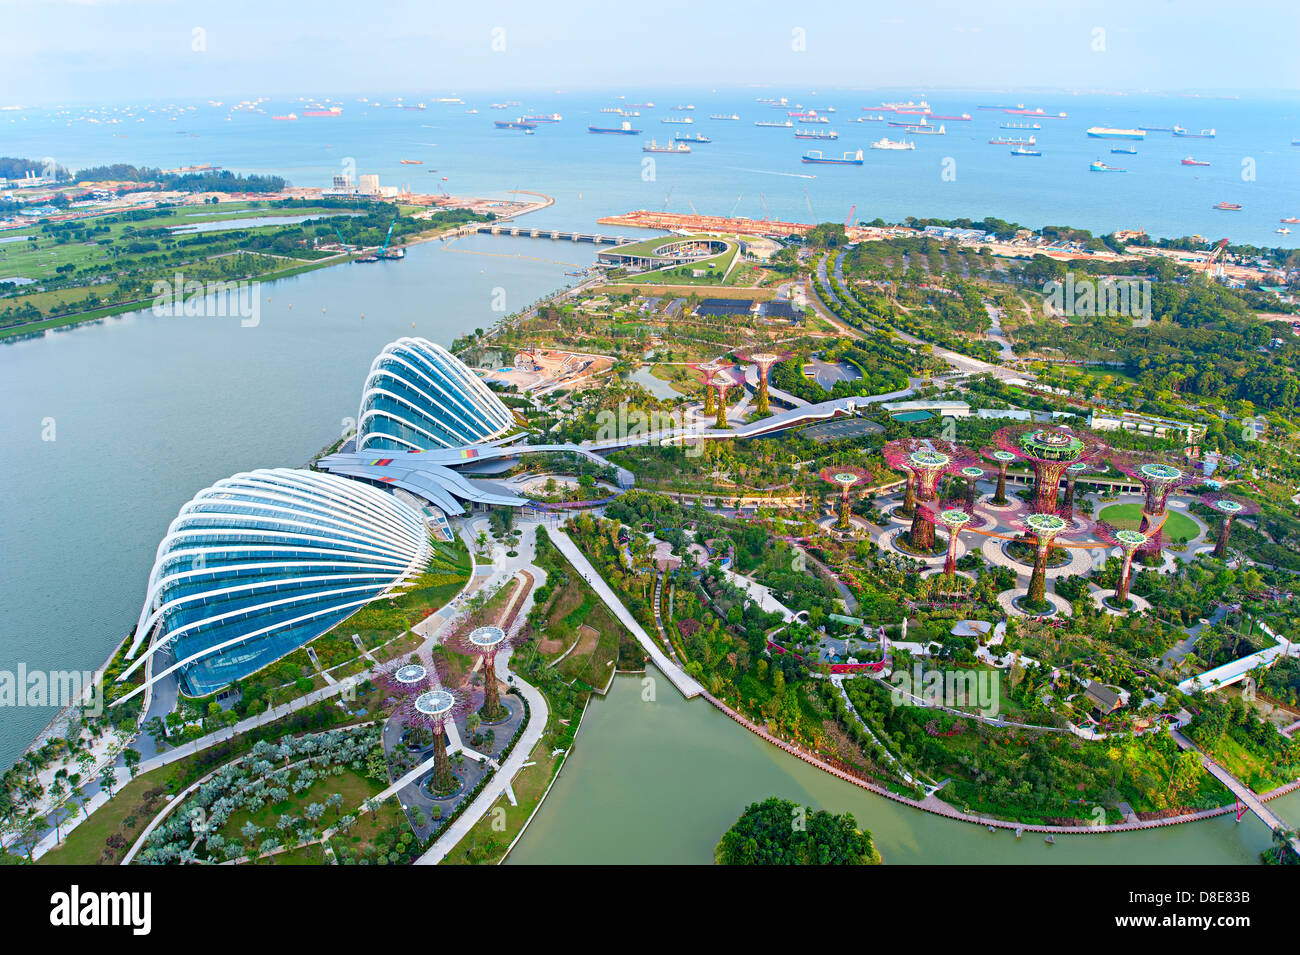 An aerial view of Gardens by the Bay in Singapore. Stock Photo